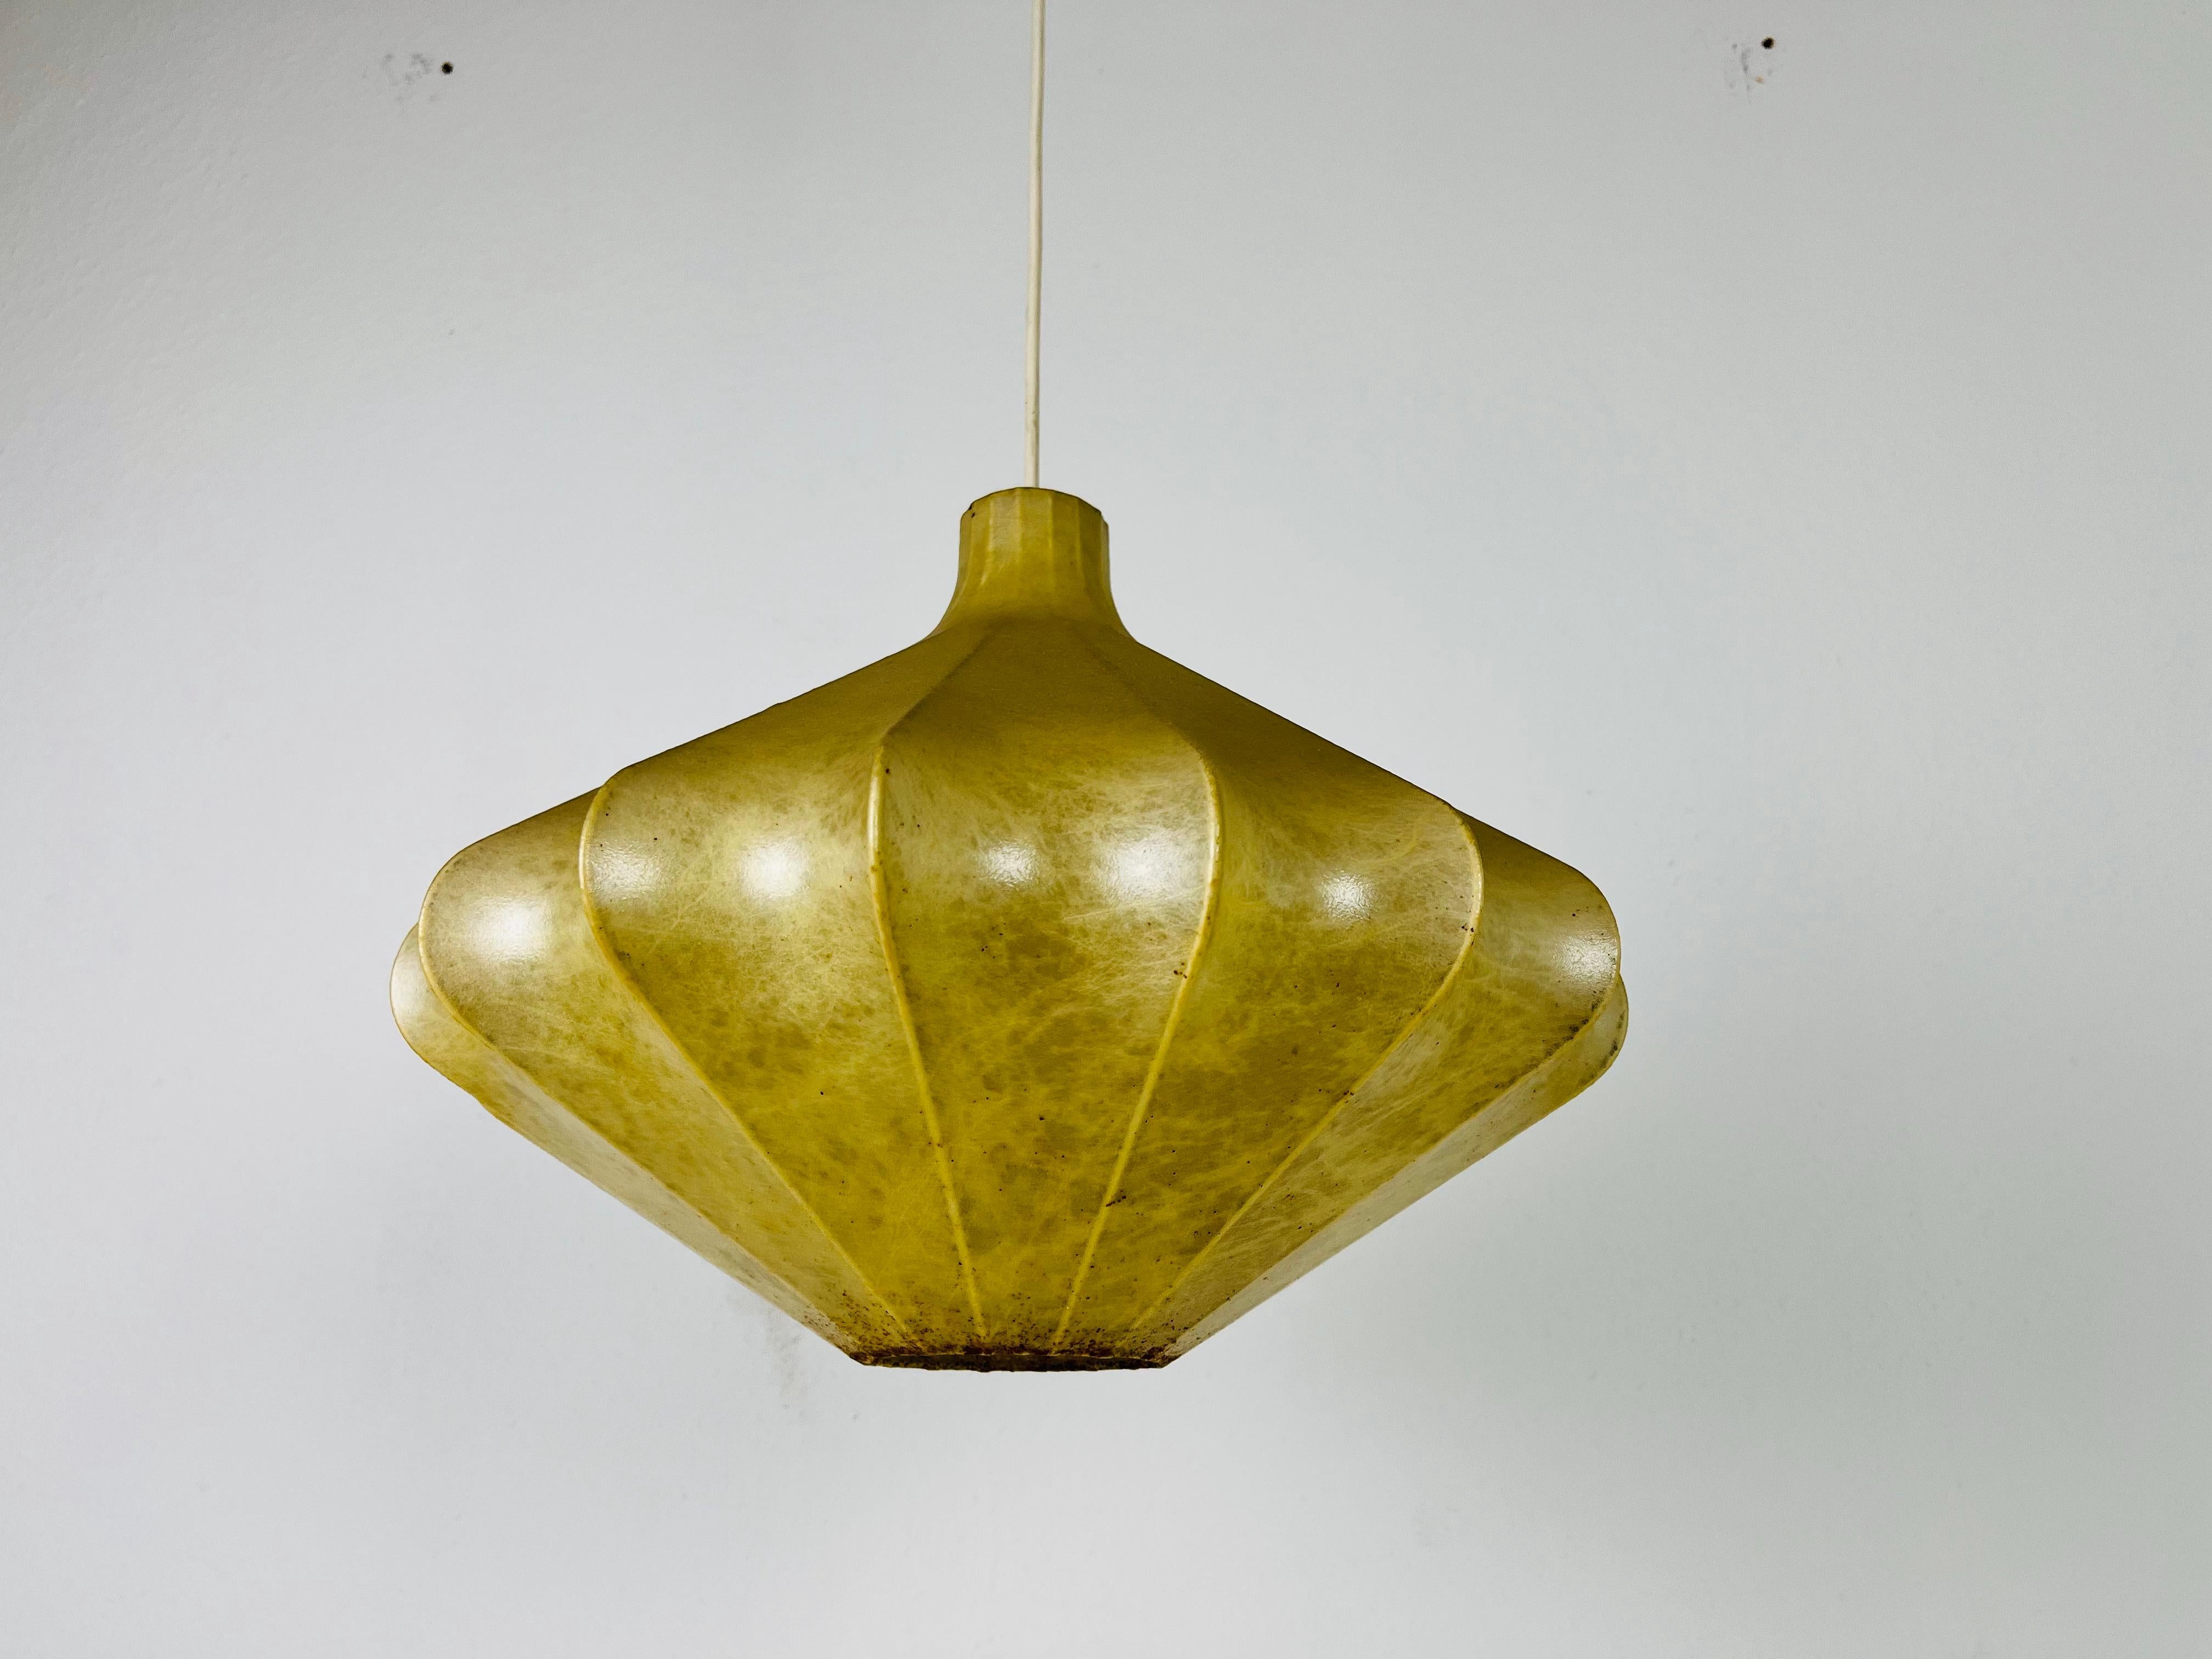 A cocoon pendant lamp made in Italy in the 1960s. The hanging lamp has been manufactured in the design of the lamps made by Achille Castiglioni. The lamp shade is of original cocoon and has an organic shape. 

Measures: 
Height: 30-80